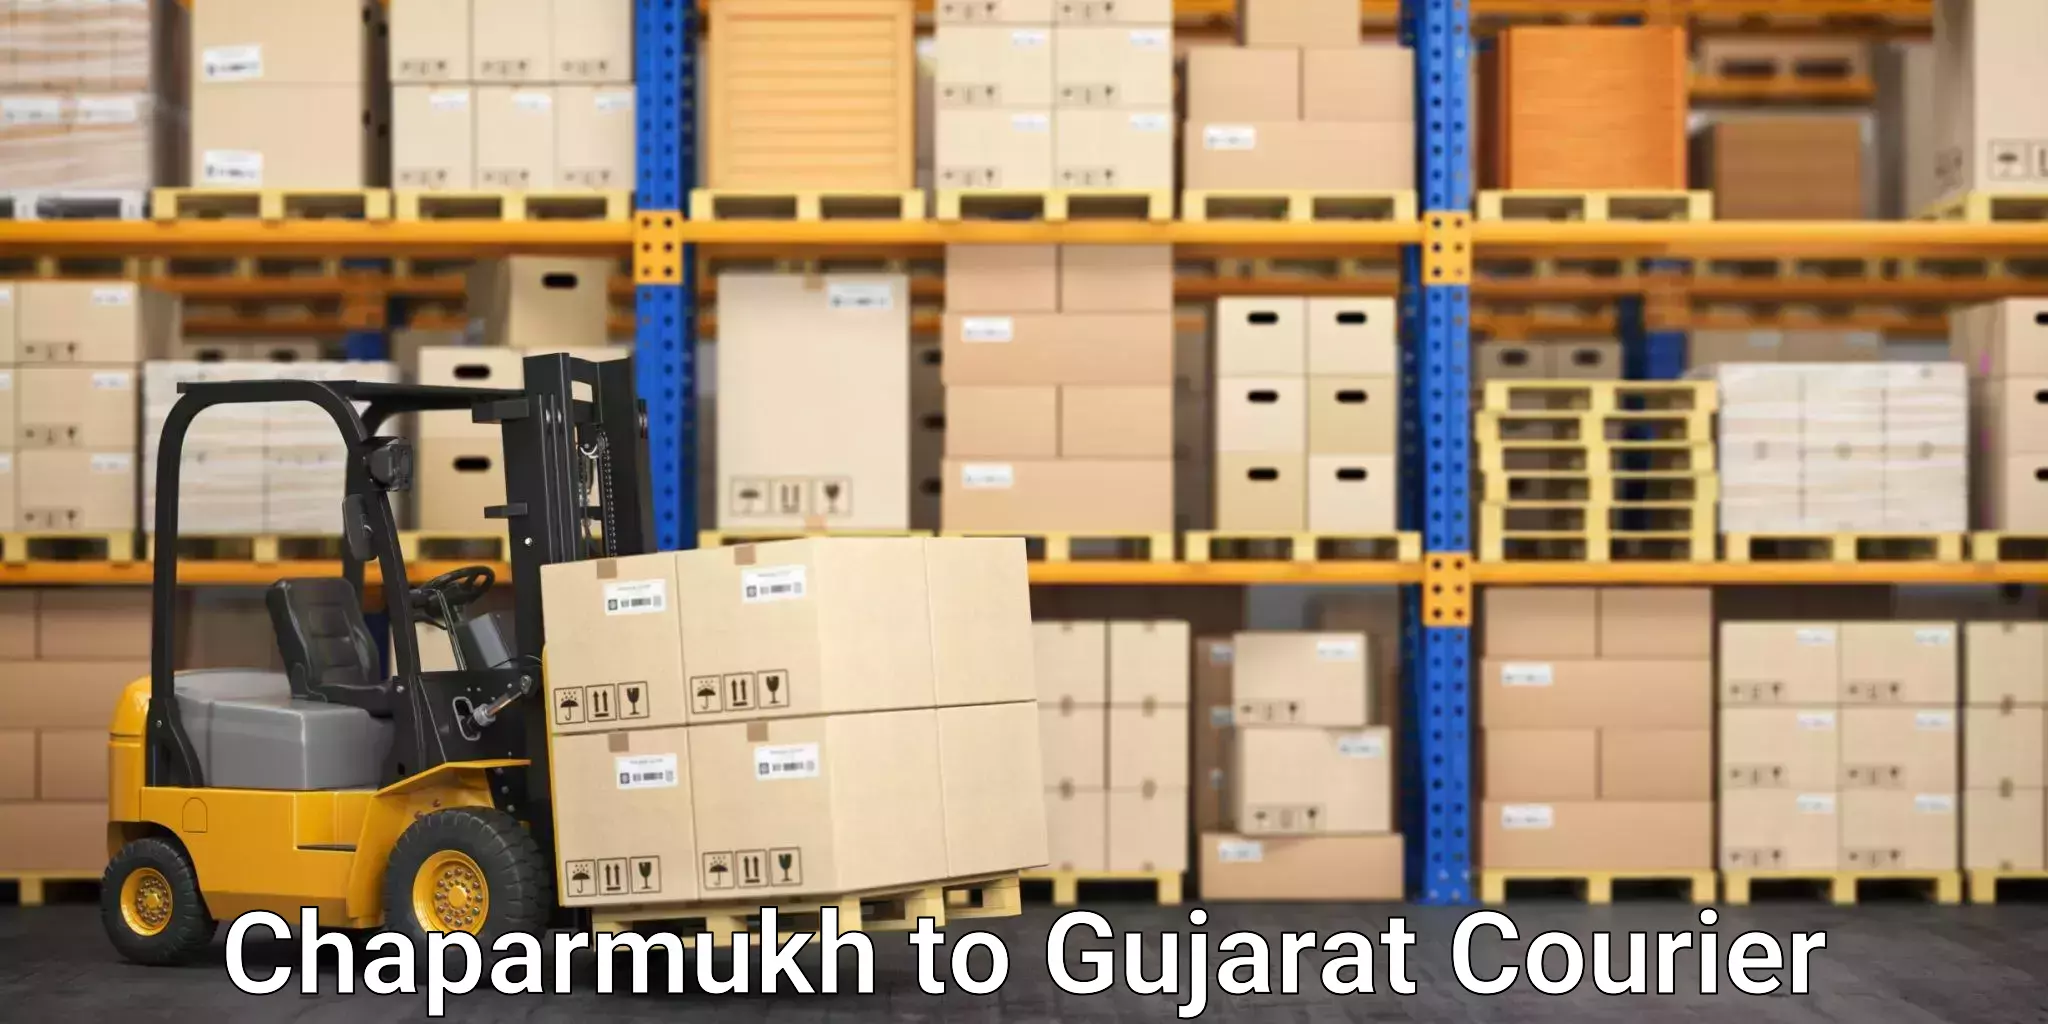 Large-scale shipping solutions Chaparmukh to Dahej